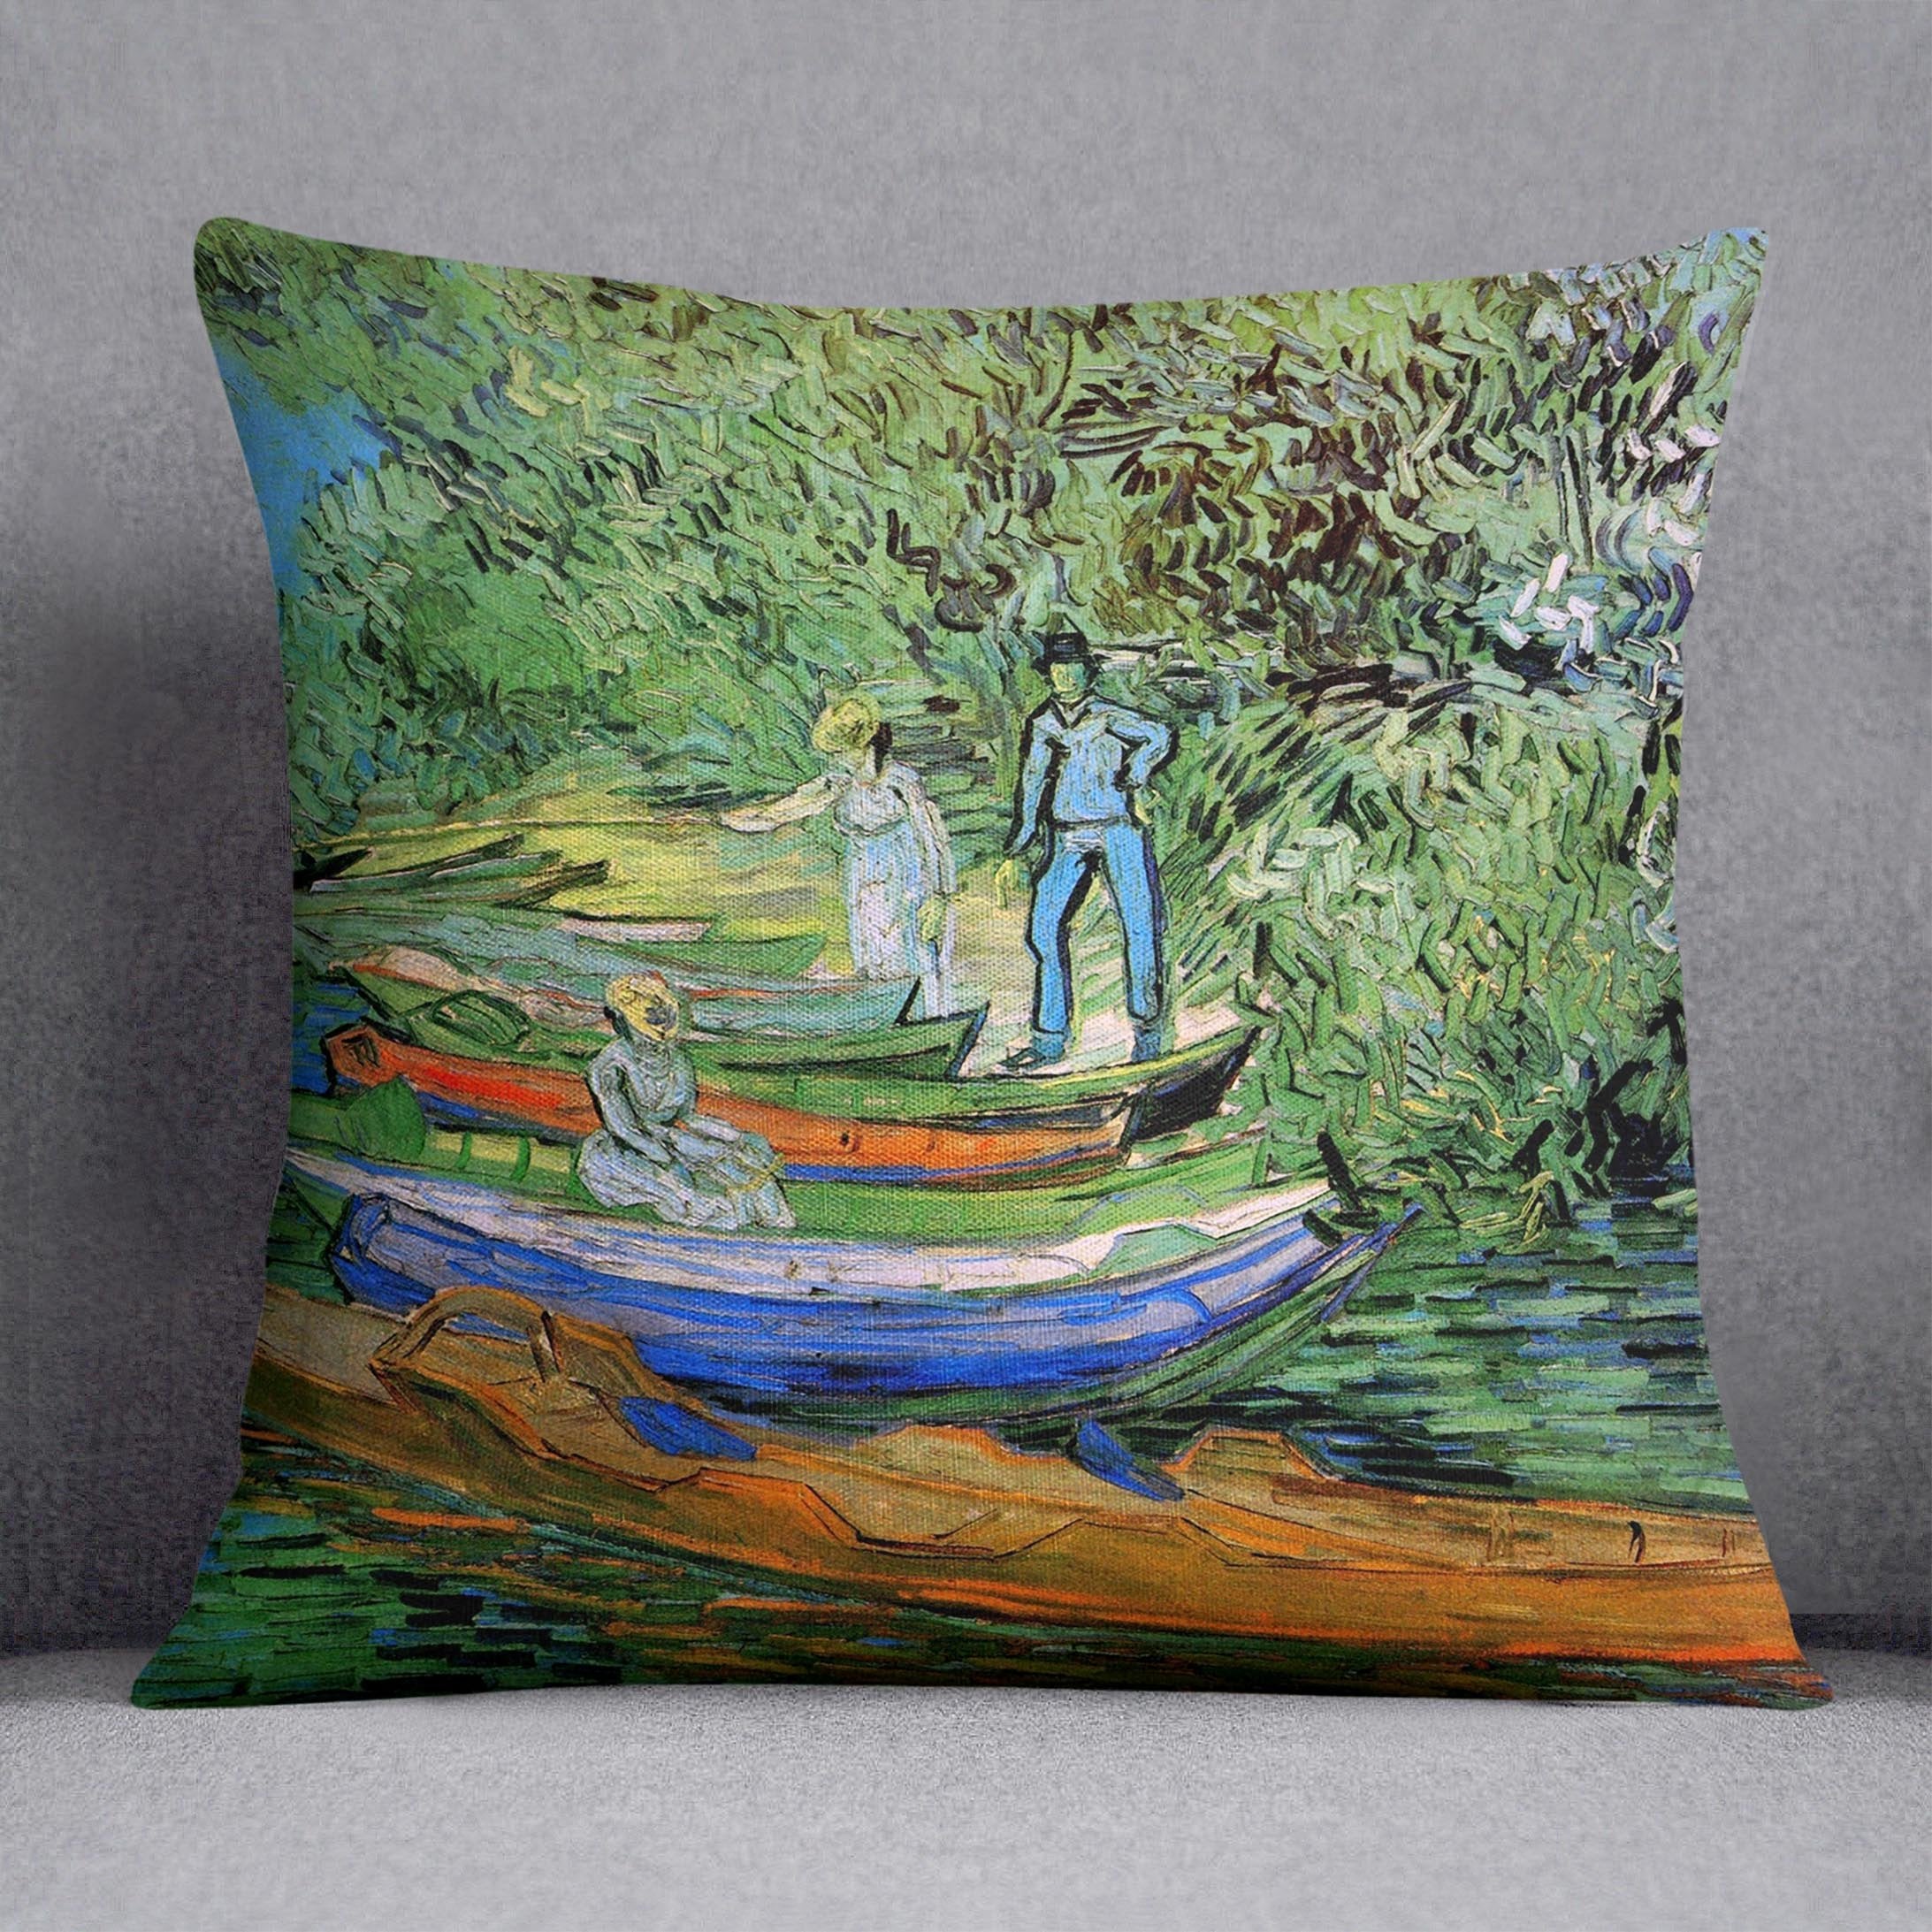 Bank of the Oise at Auvers by Van Gogh Throw Pillow